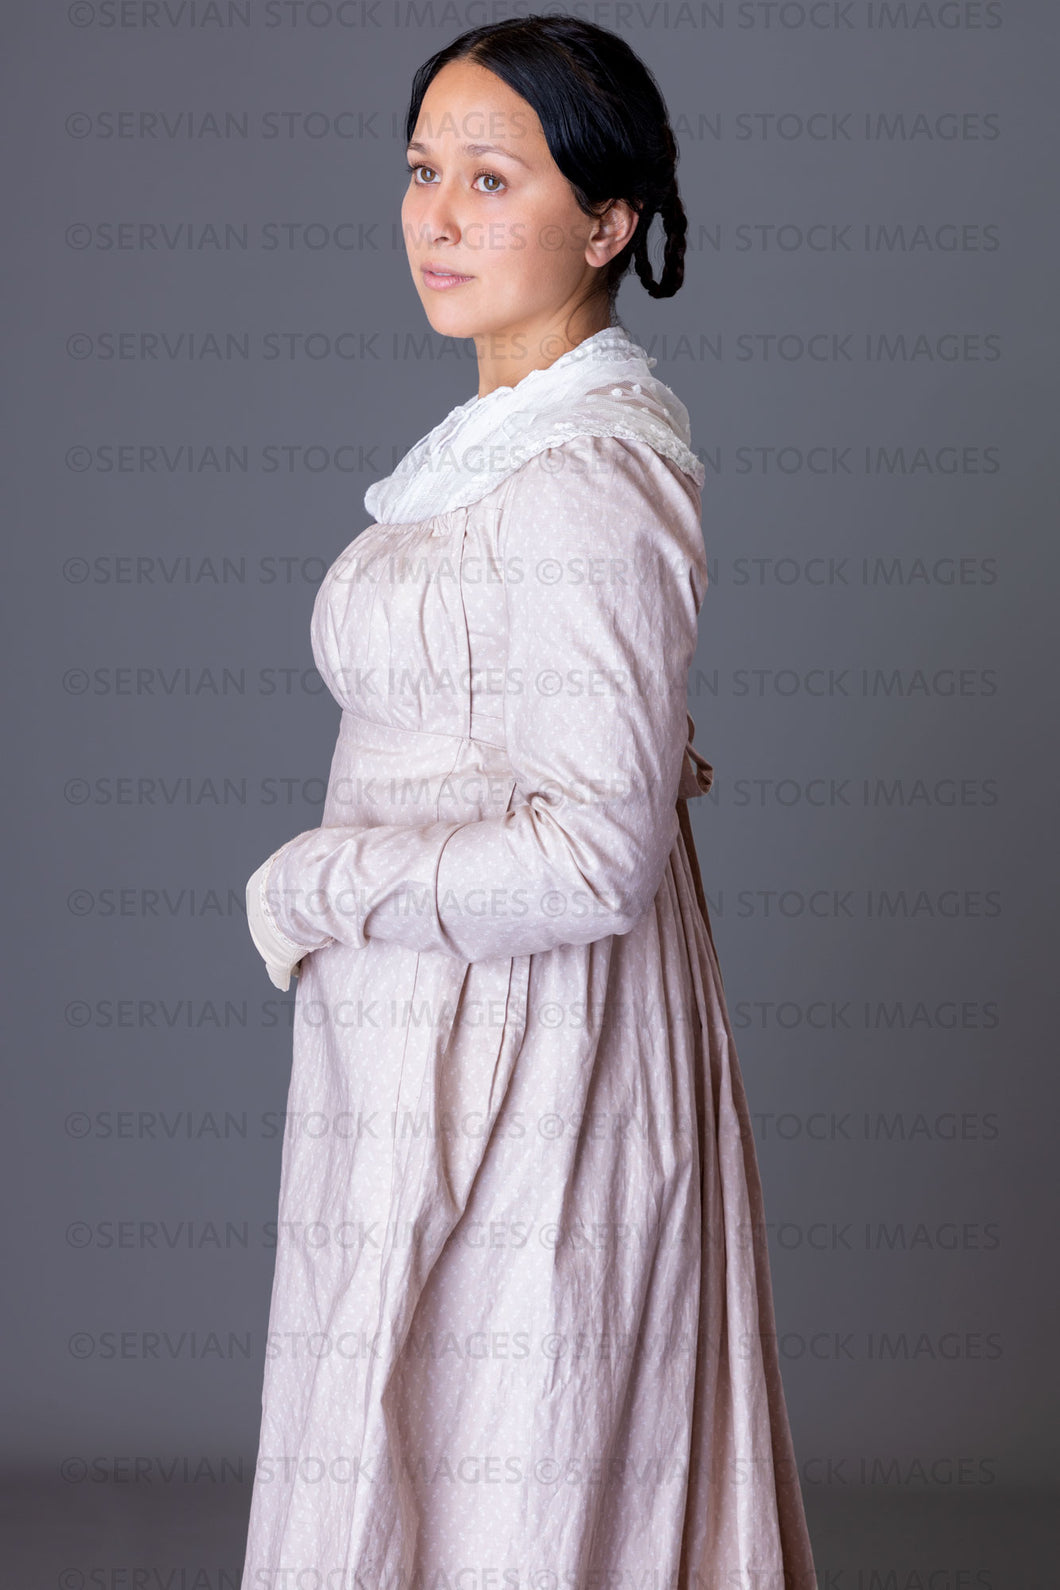 Regency woman wearing a cotton dress with a lace modesty shawl (Sylvia 5943)